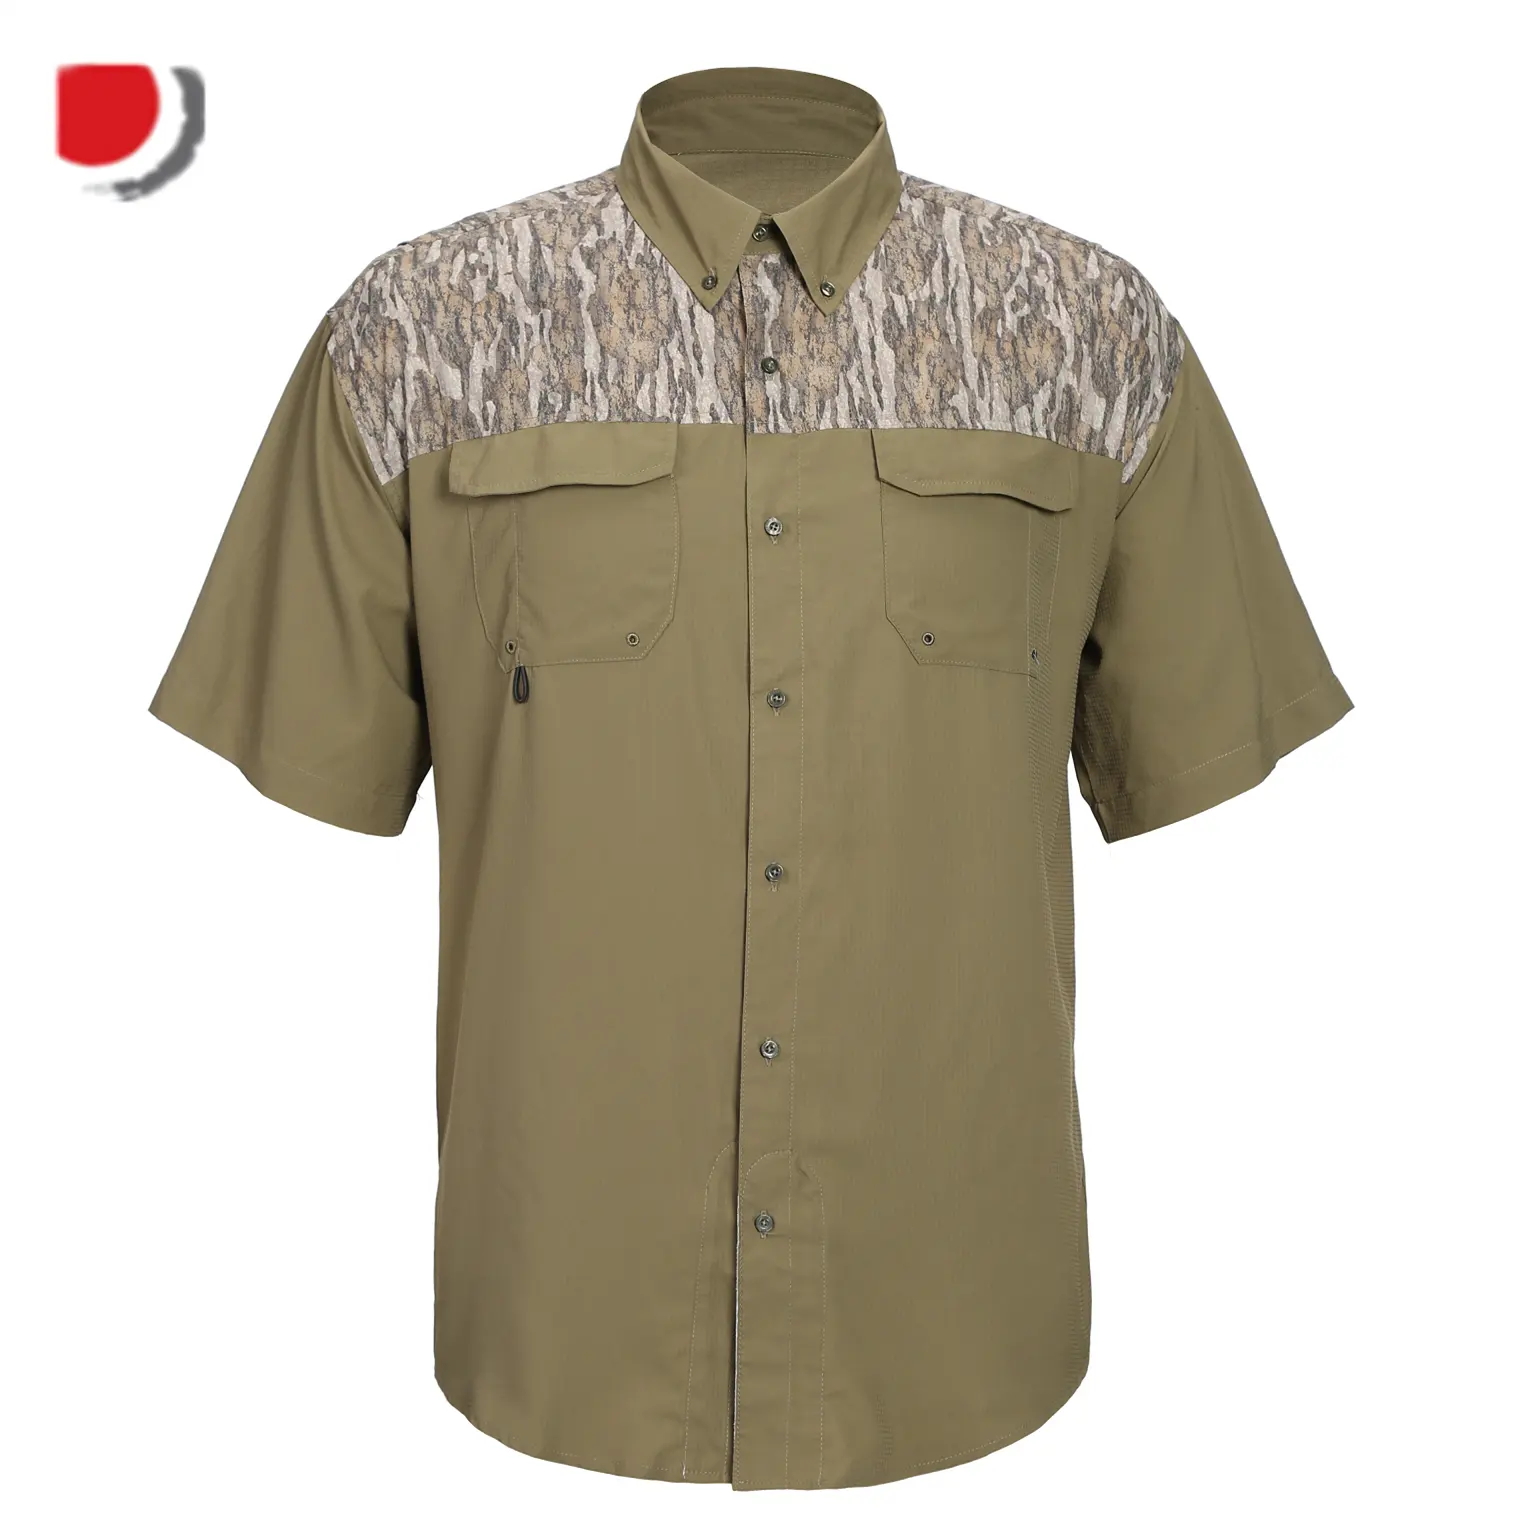 men's hunting camo shirt breathable and quick dry fabric chest pocket vent shirt